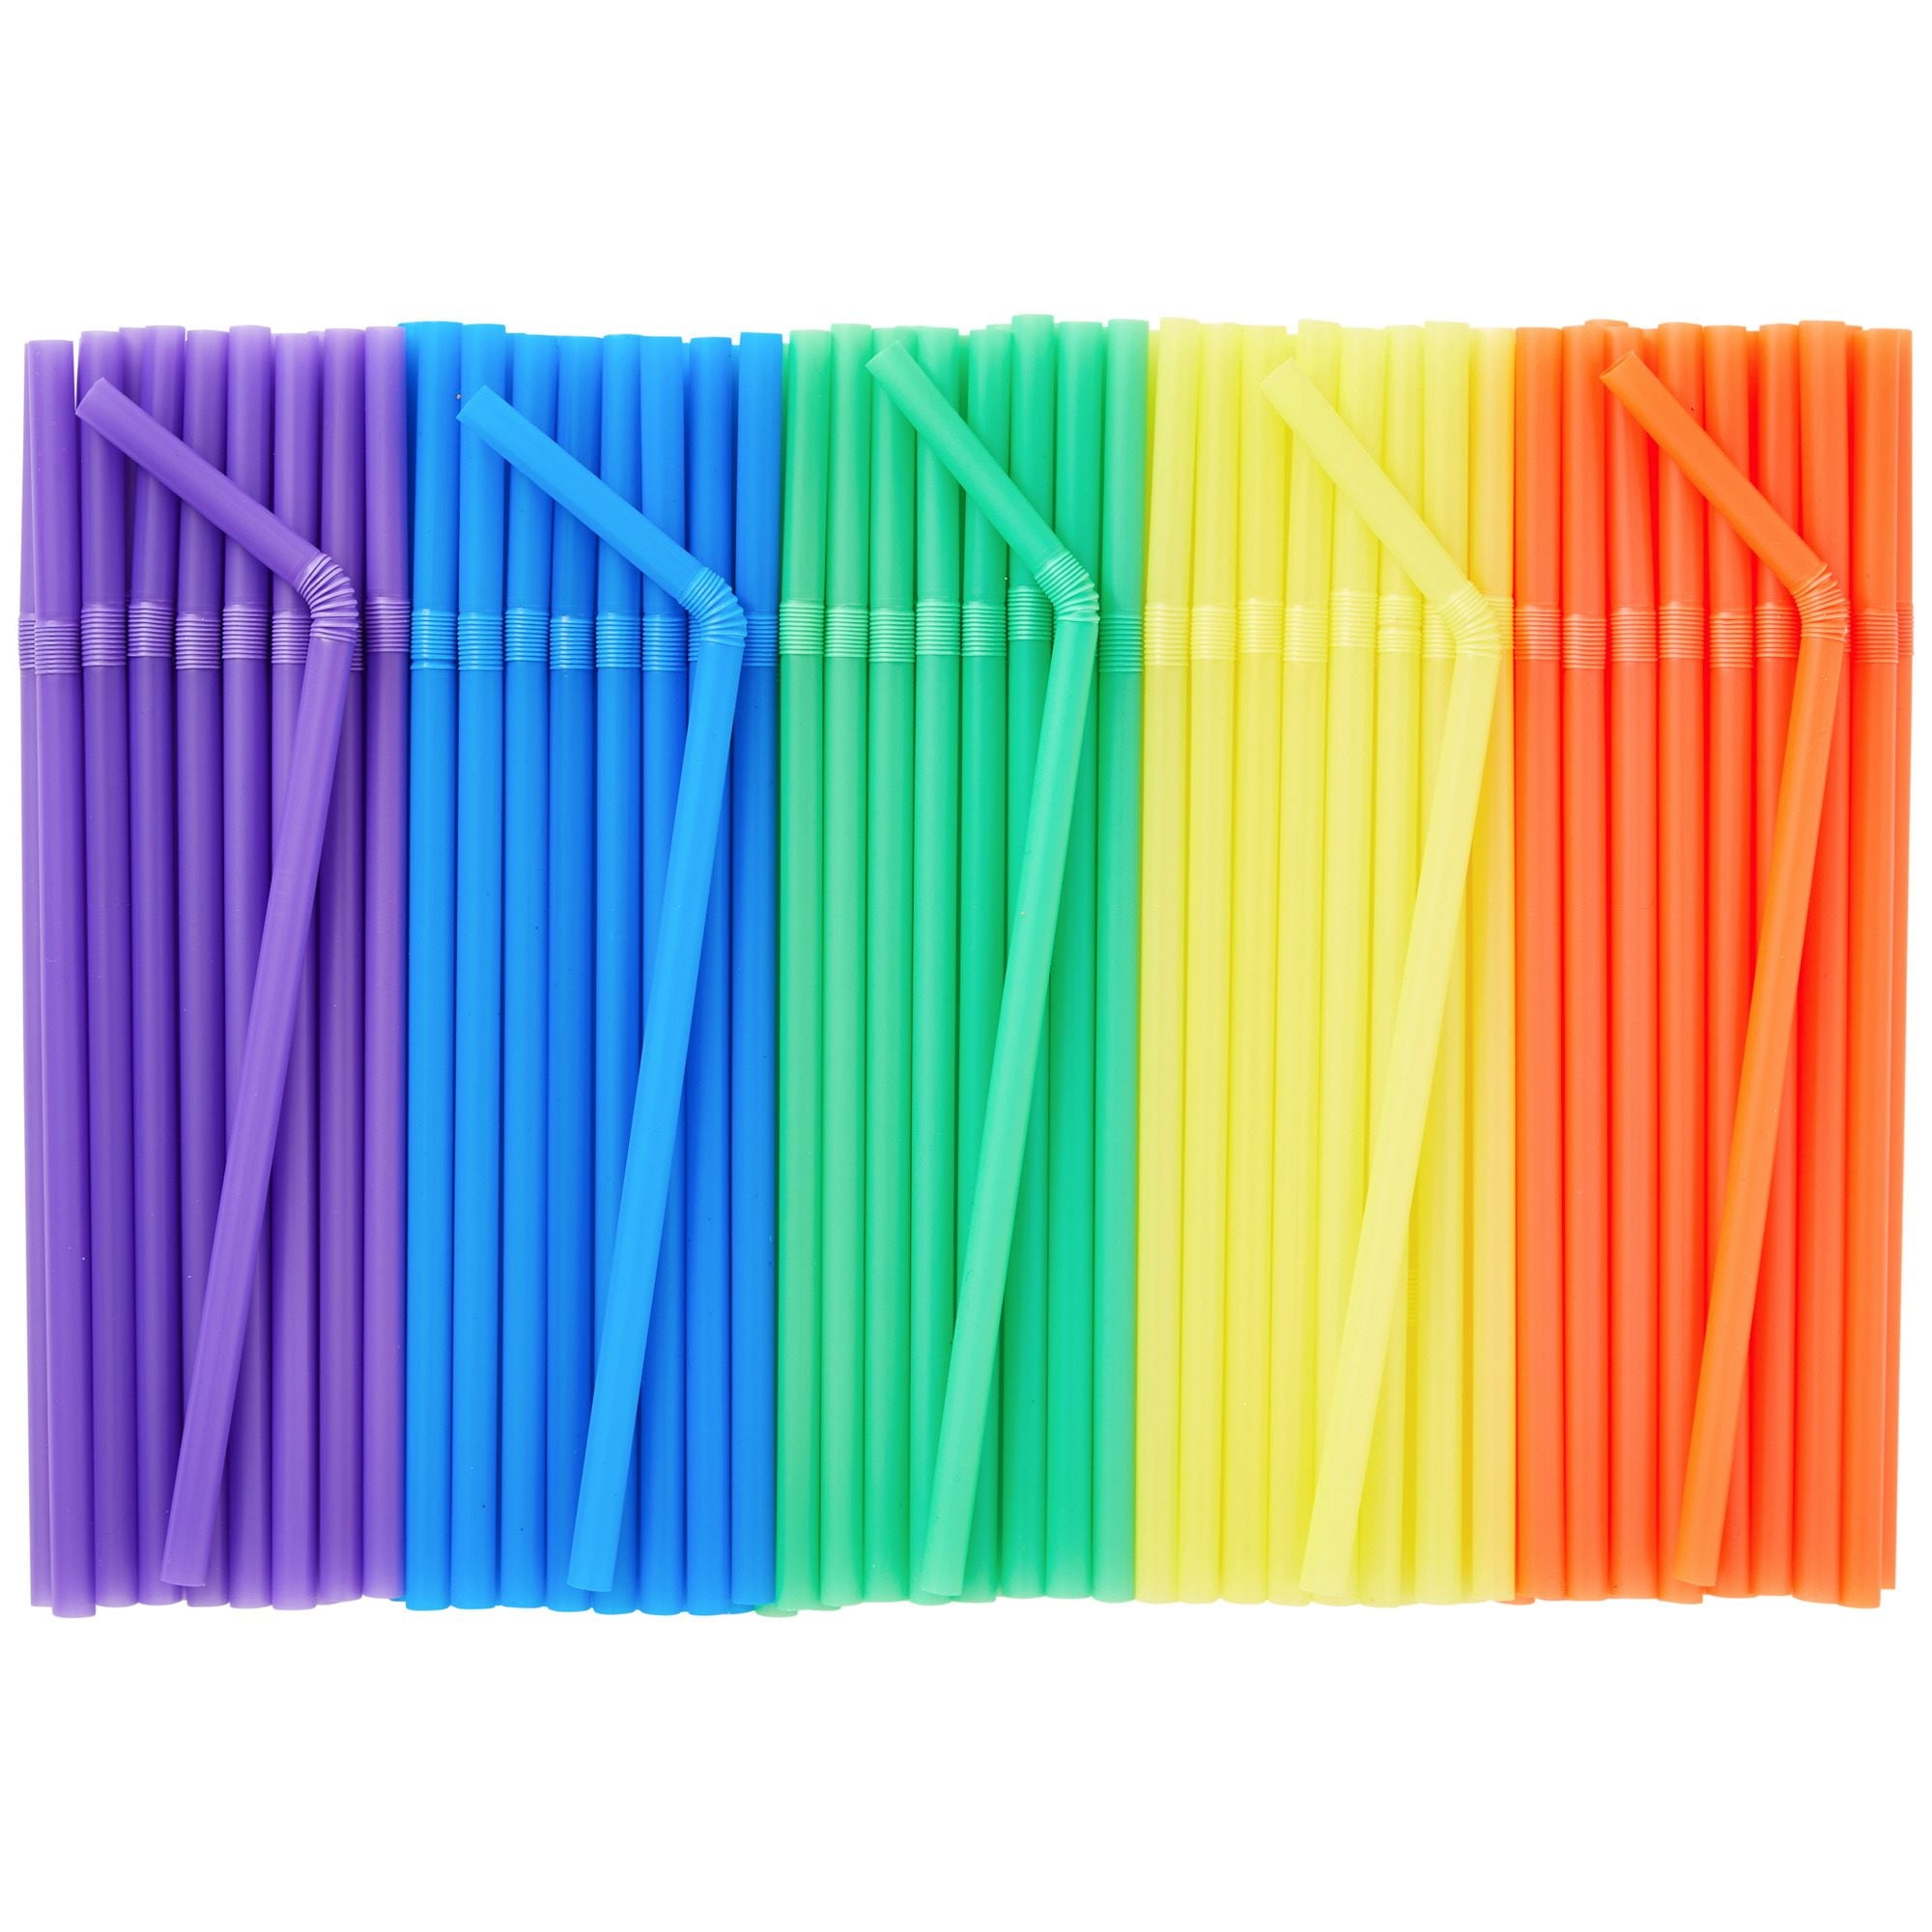 Extra Long Flexible Drinking Straws :: 28 inches long, package of